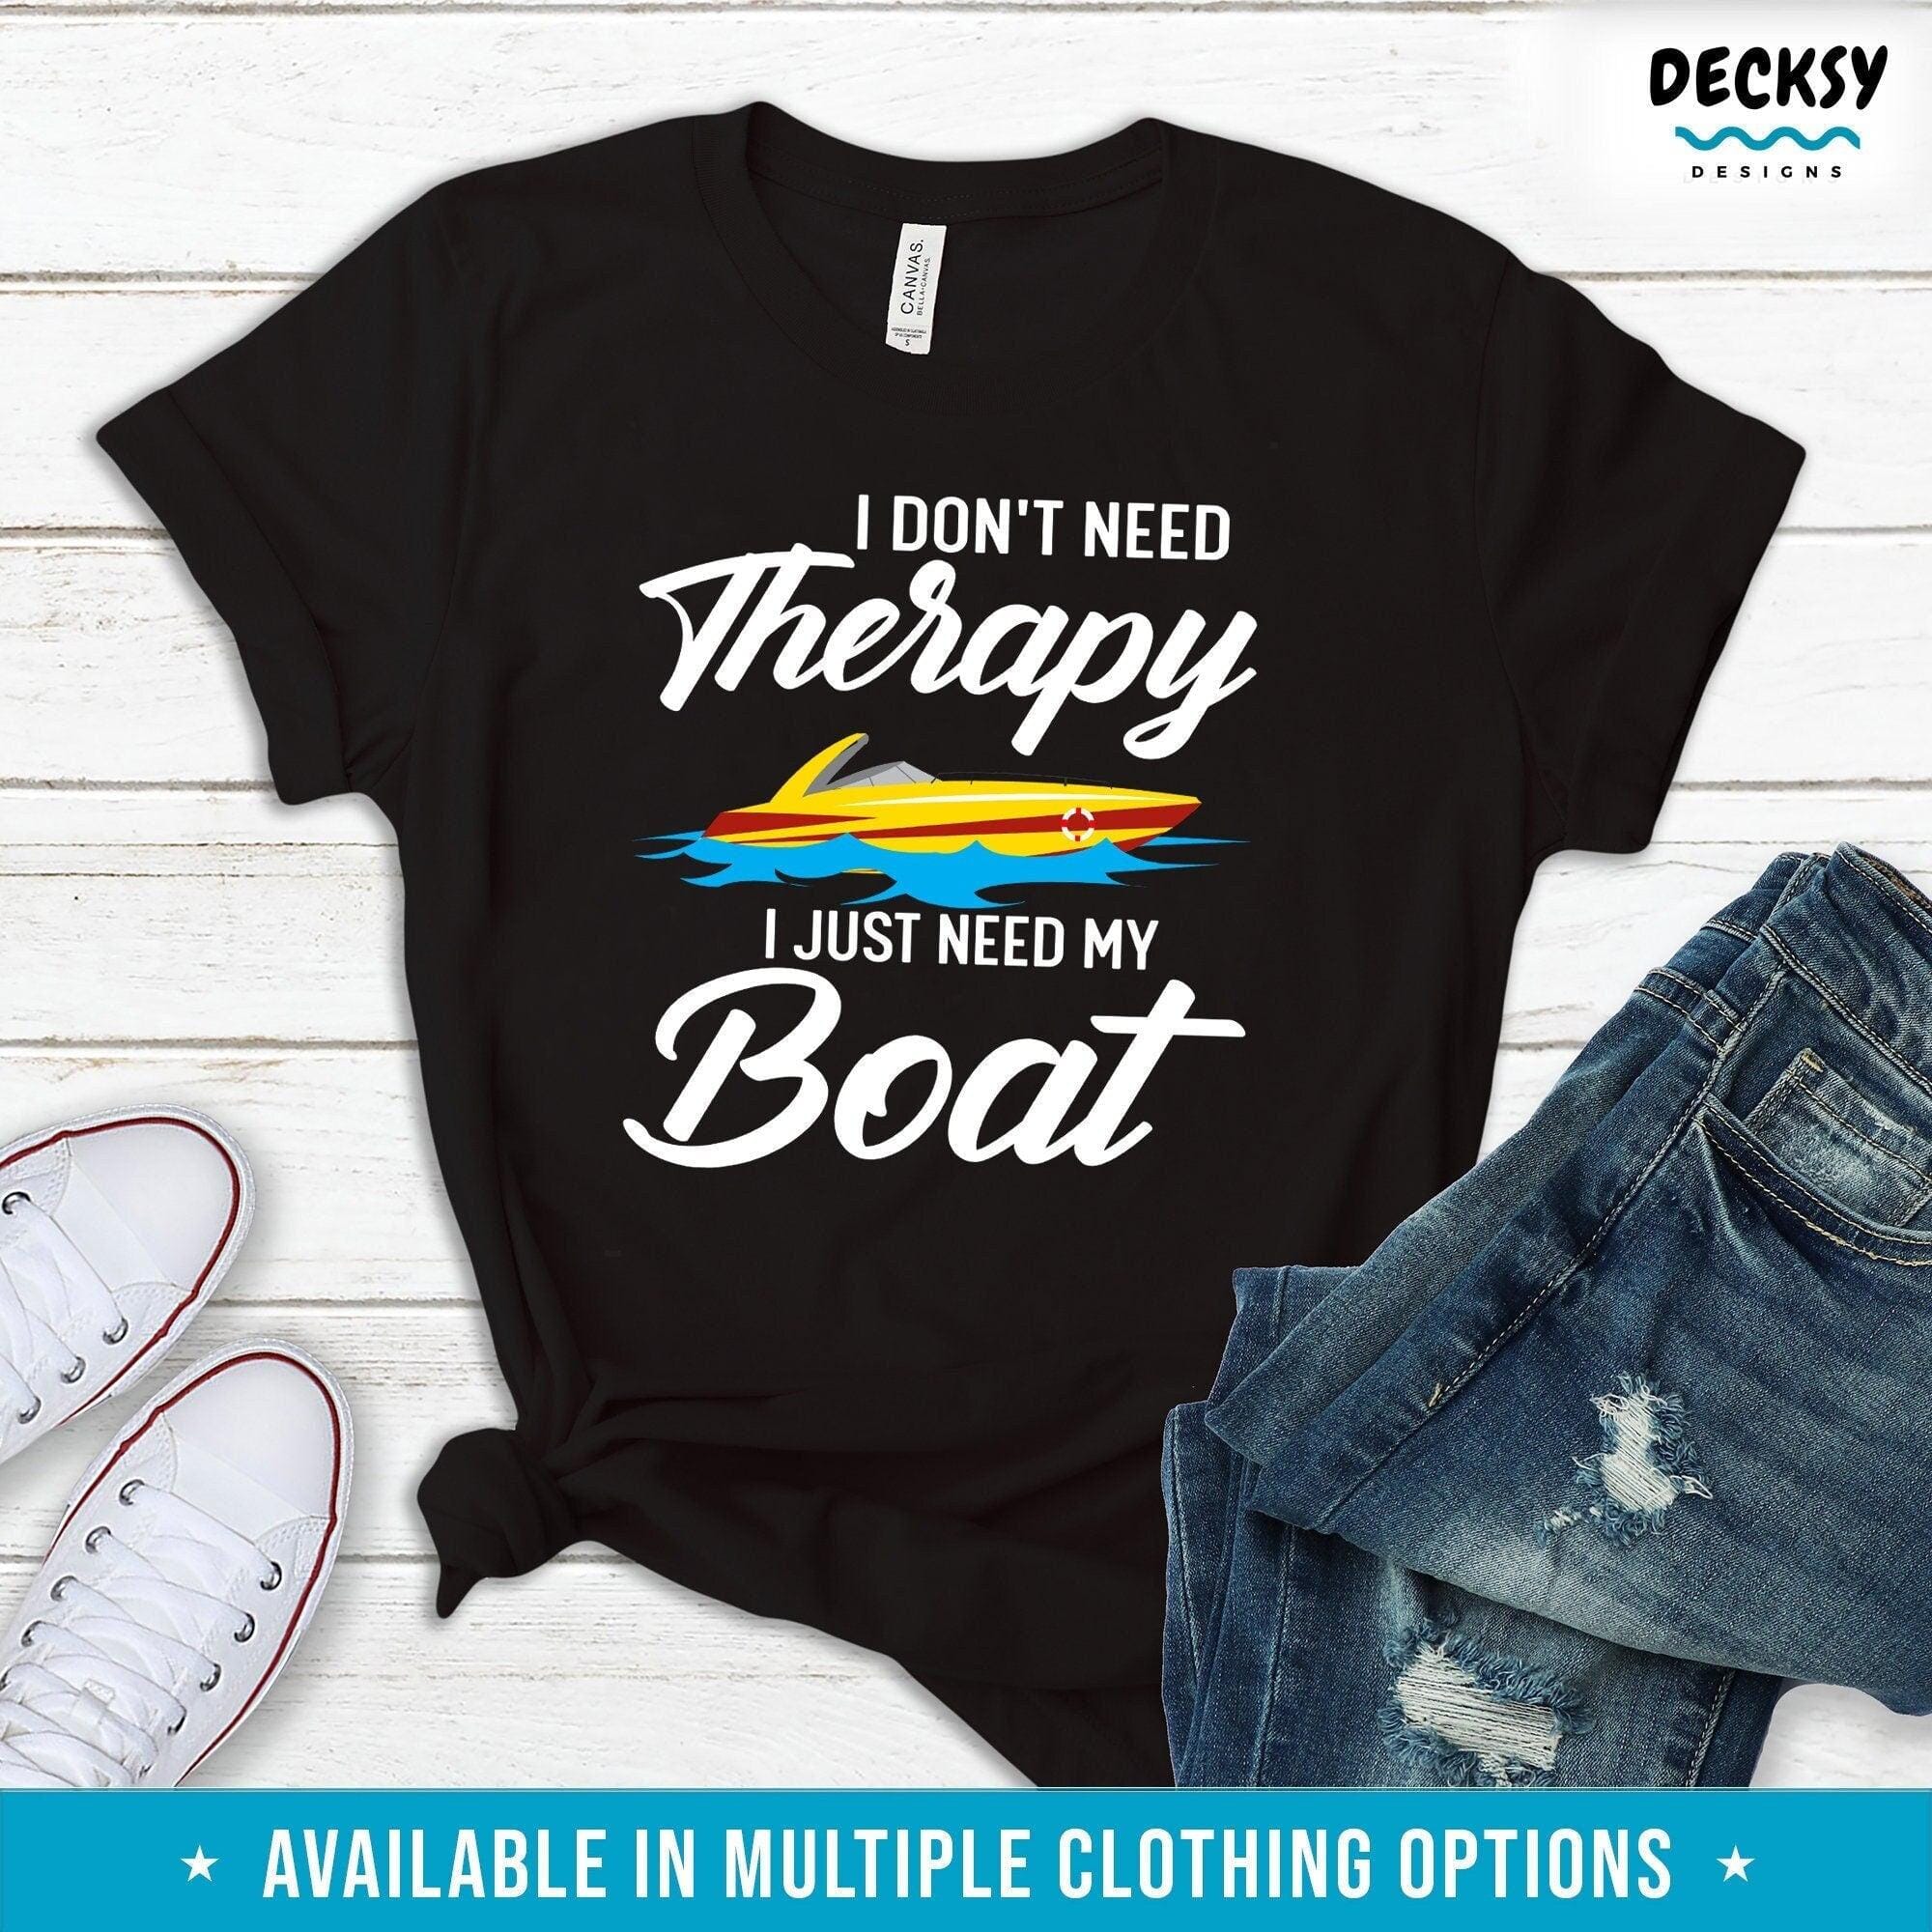 Boat Lover Shirt, Boating Gift-Clothing:Gender-Neutral Adult Clothing:Tops & Tees:T-shirts:Graphic Tees-DecksyDesigns